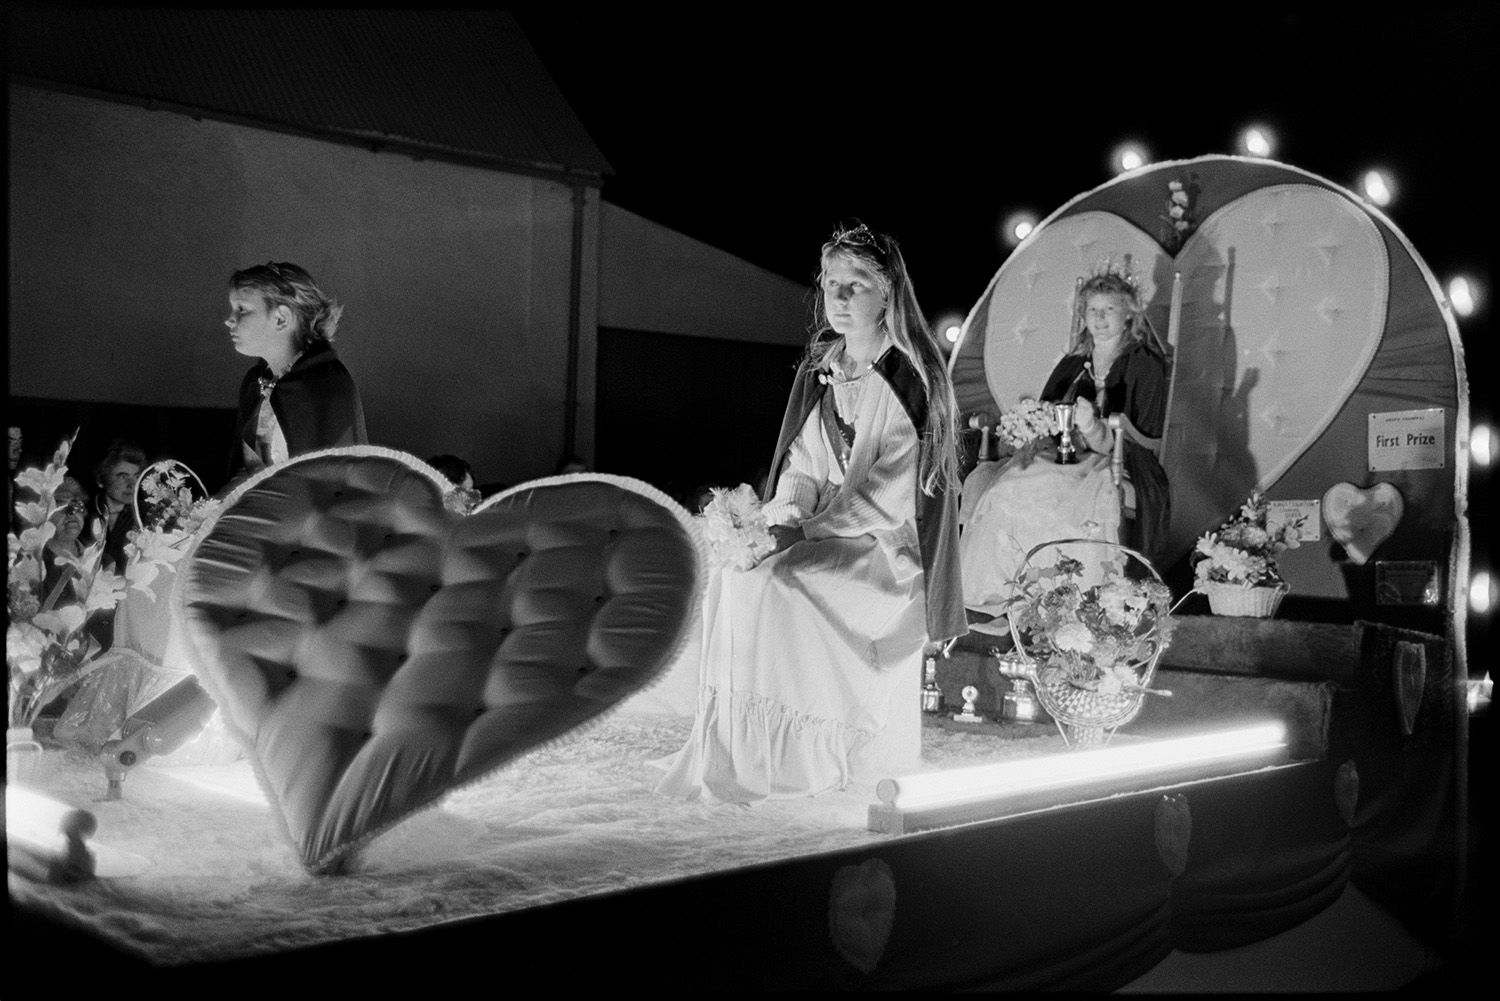 Carnival procession at night. Queen and attendants and other floodlit floats with children.
[Three girls sitting on a carnival float decorated with hearts and flowers during the evening procession at Hatherleigh Carnival. There is a first prize certificate and trophies on display.]